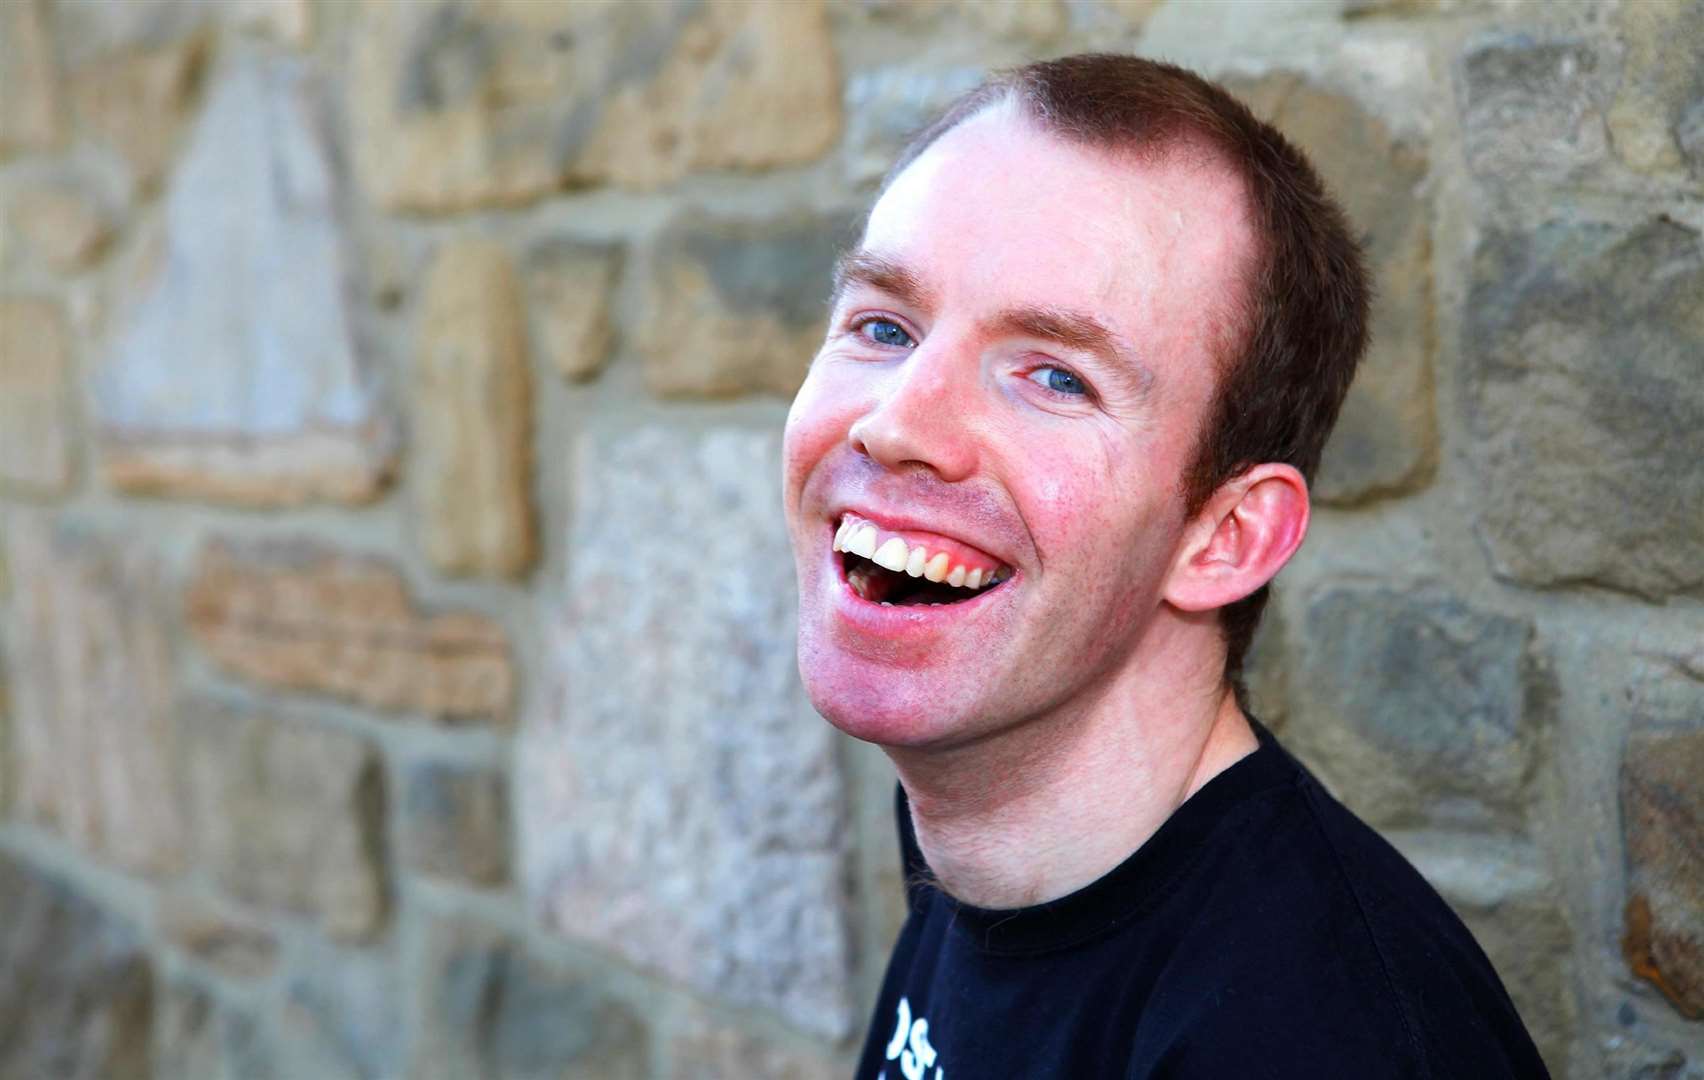 Lee Ridley, aka the Lost Voice Guy, will be at Bluewater